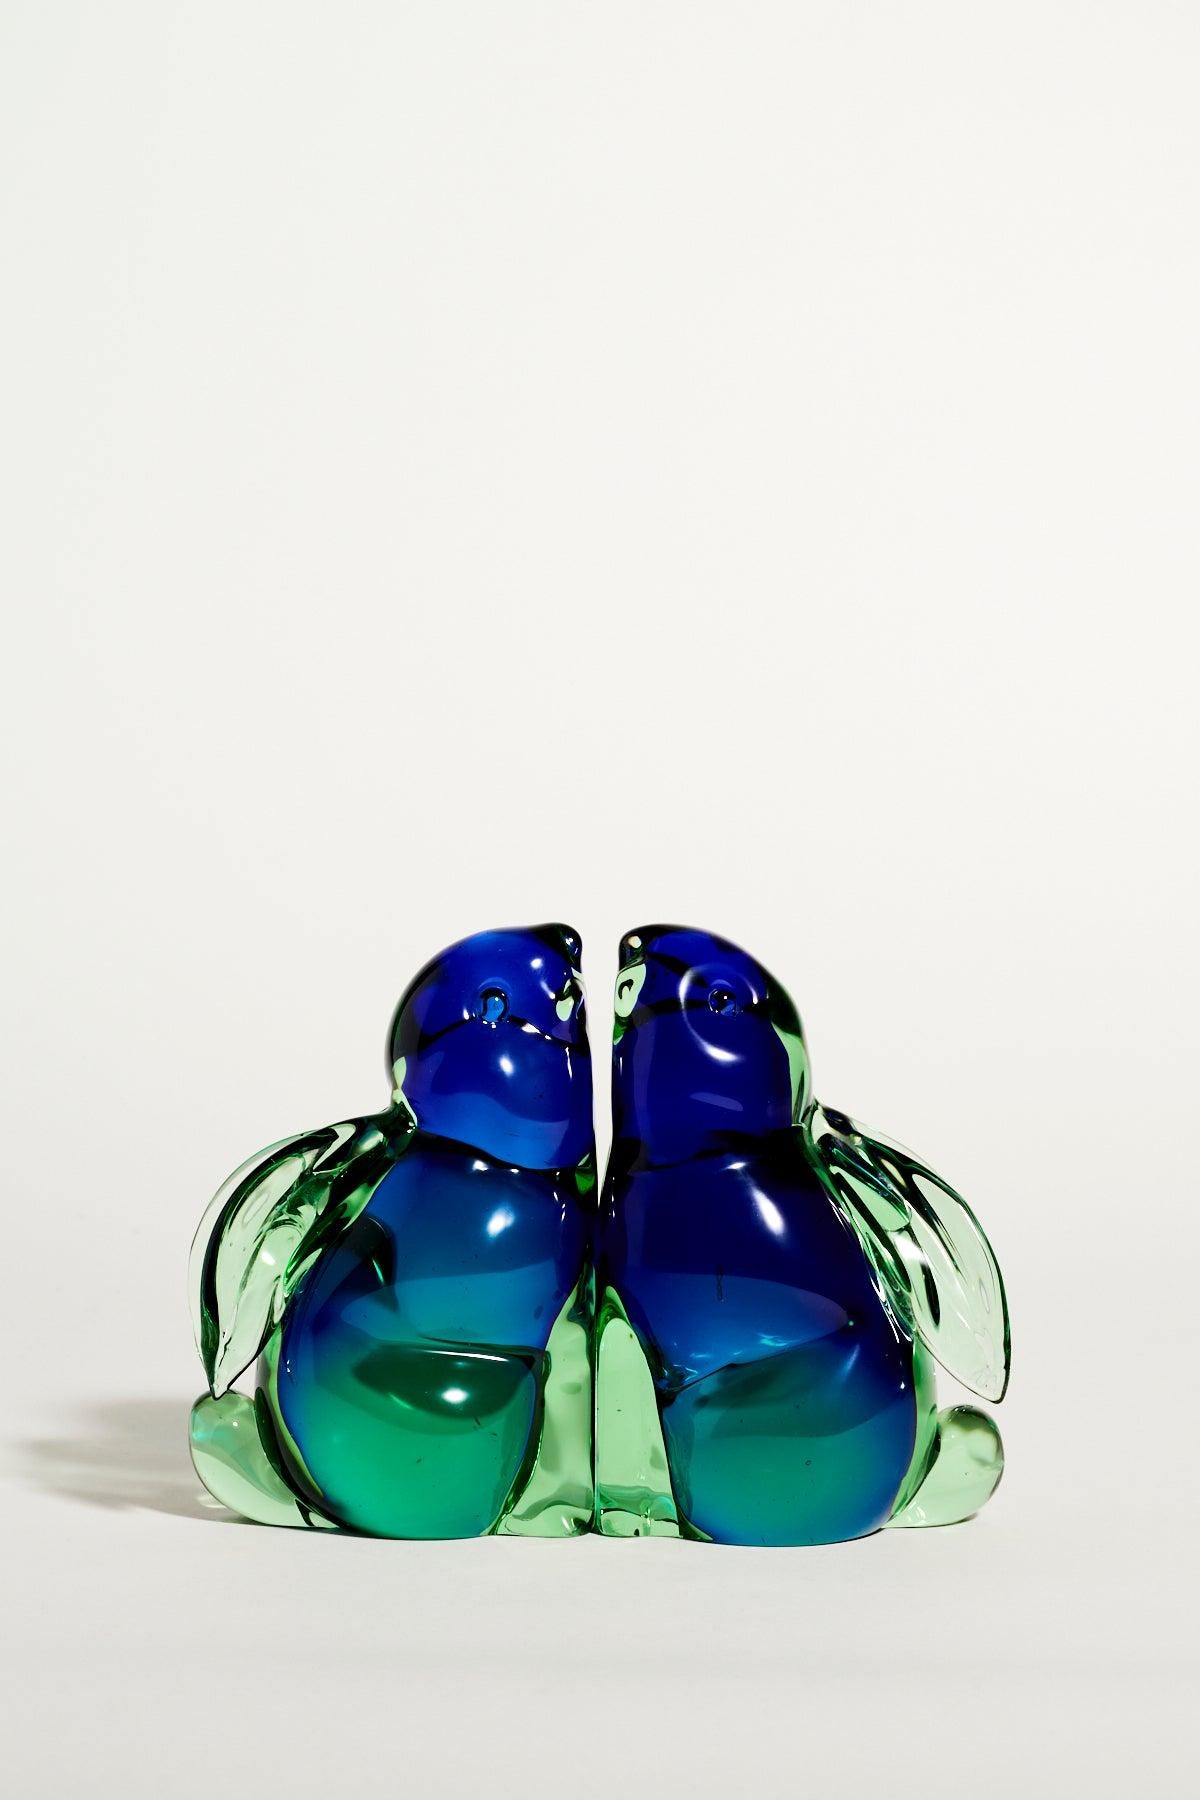 Murano glass rabbit bookends in layered shades of blue and green, one with repaired ear.